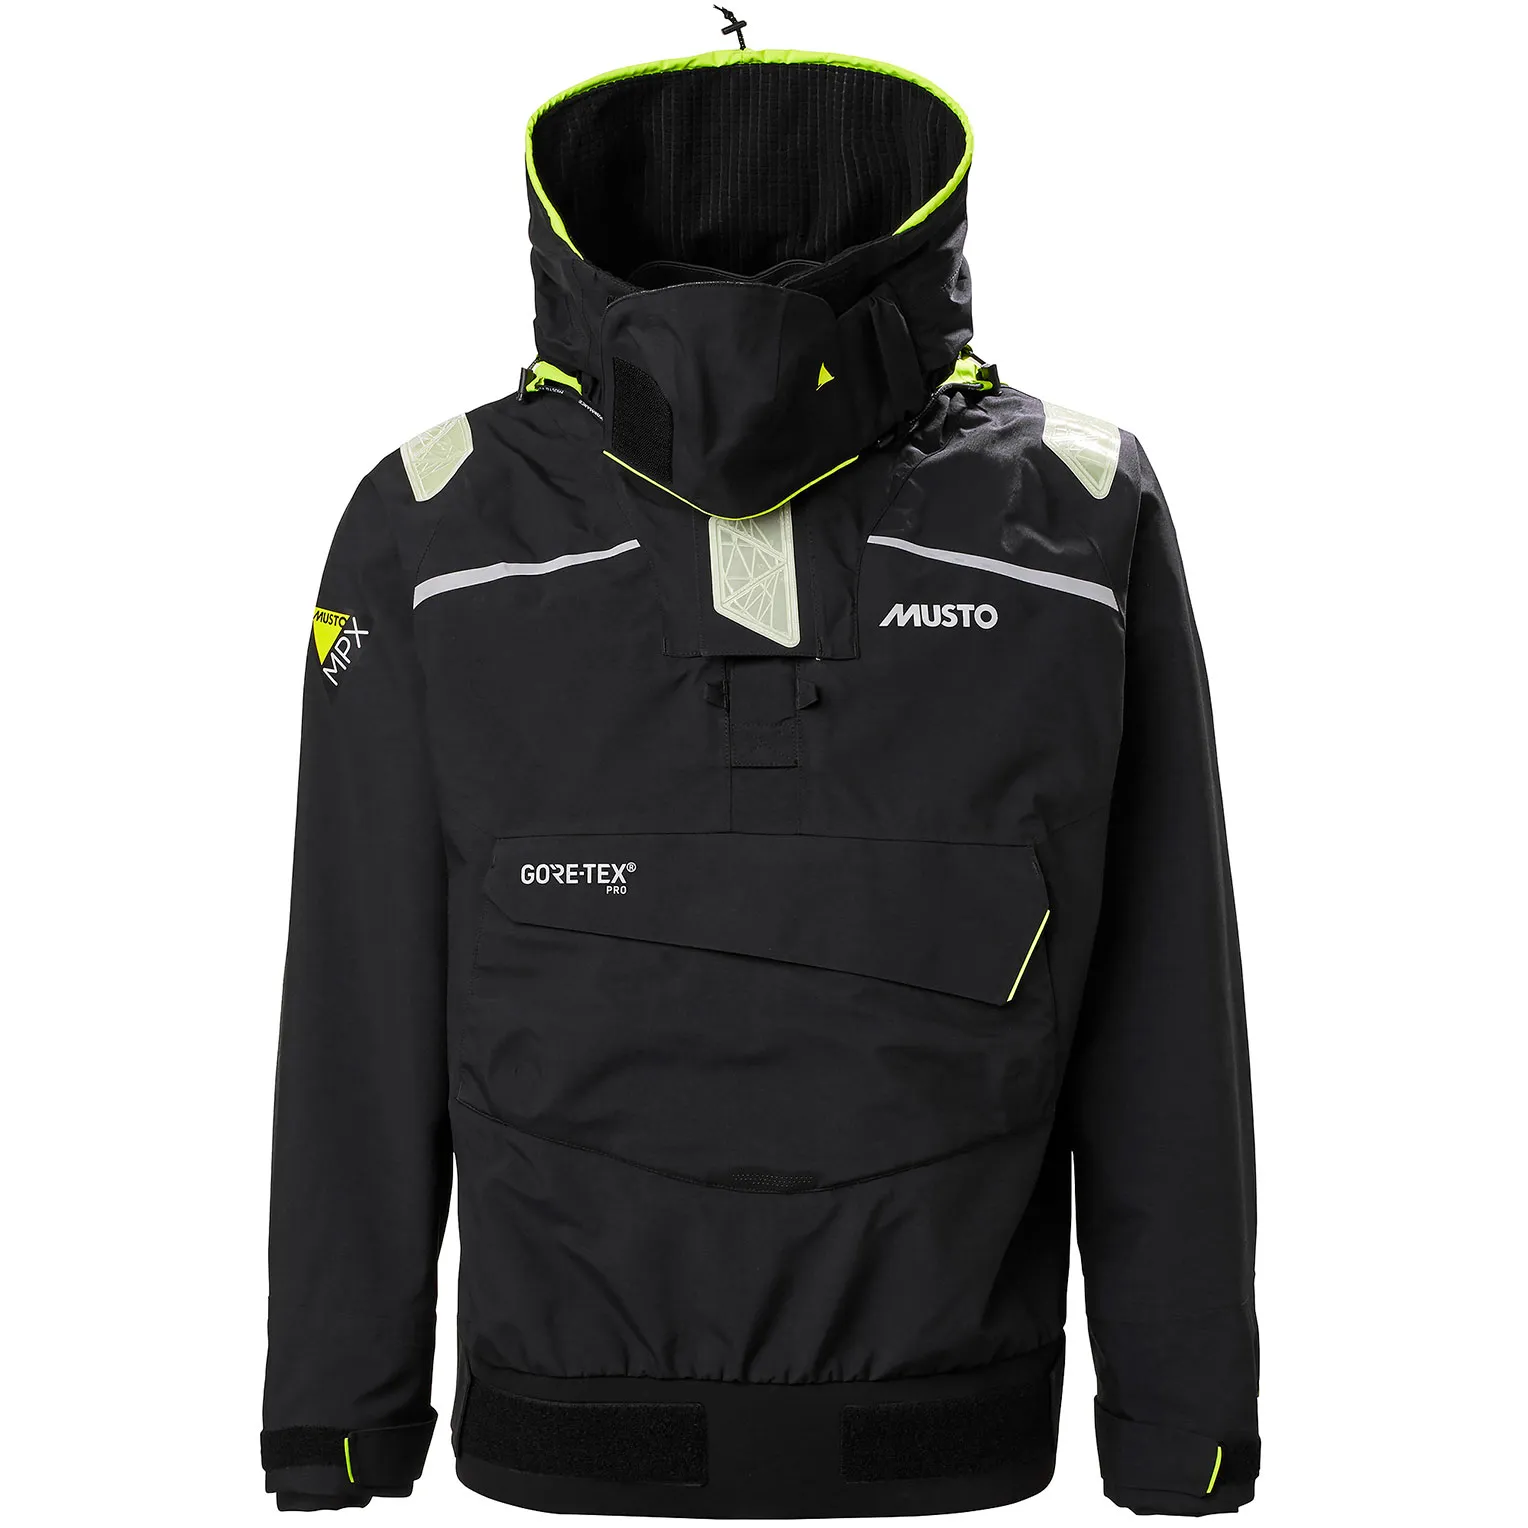 MPX GORE-TEX PRO OFFSHORE SMOCK